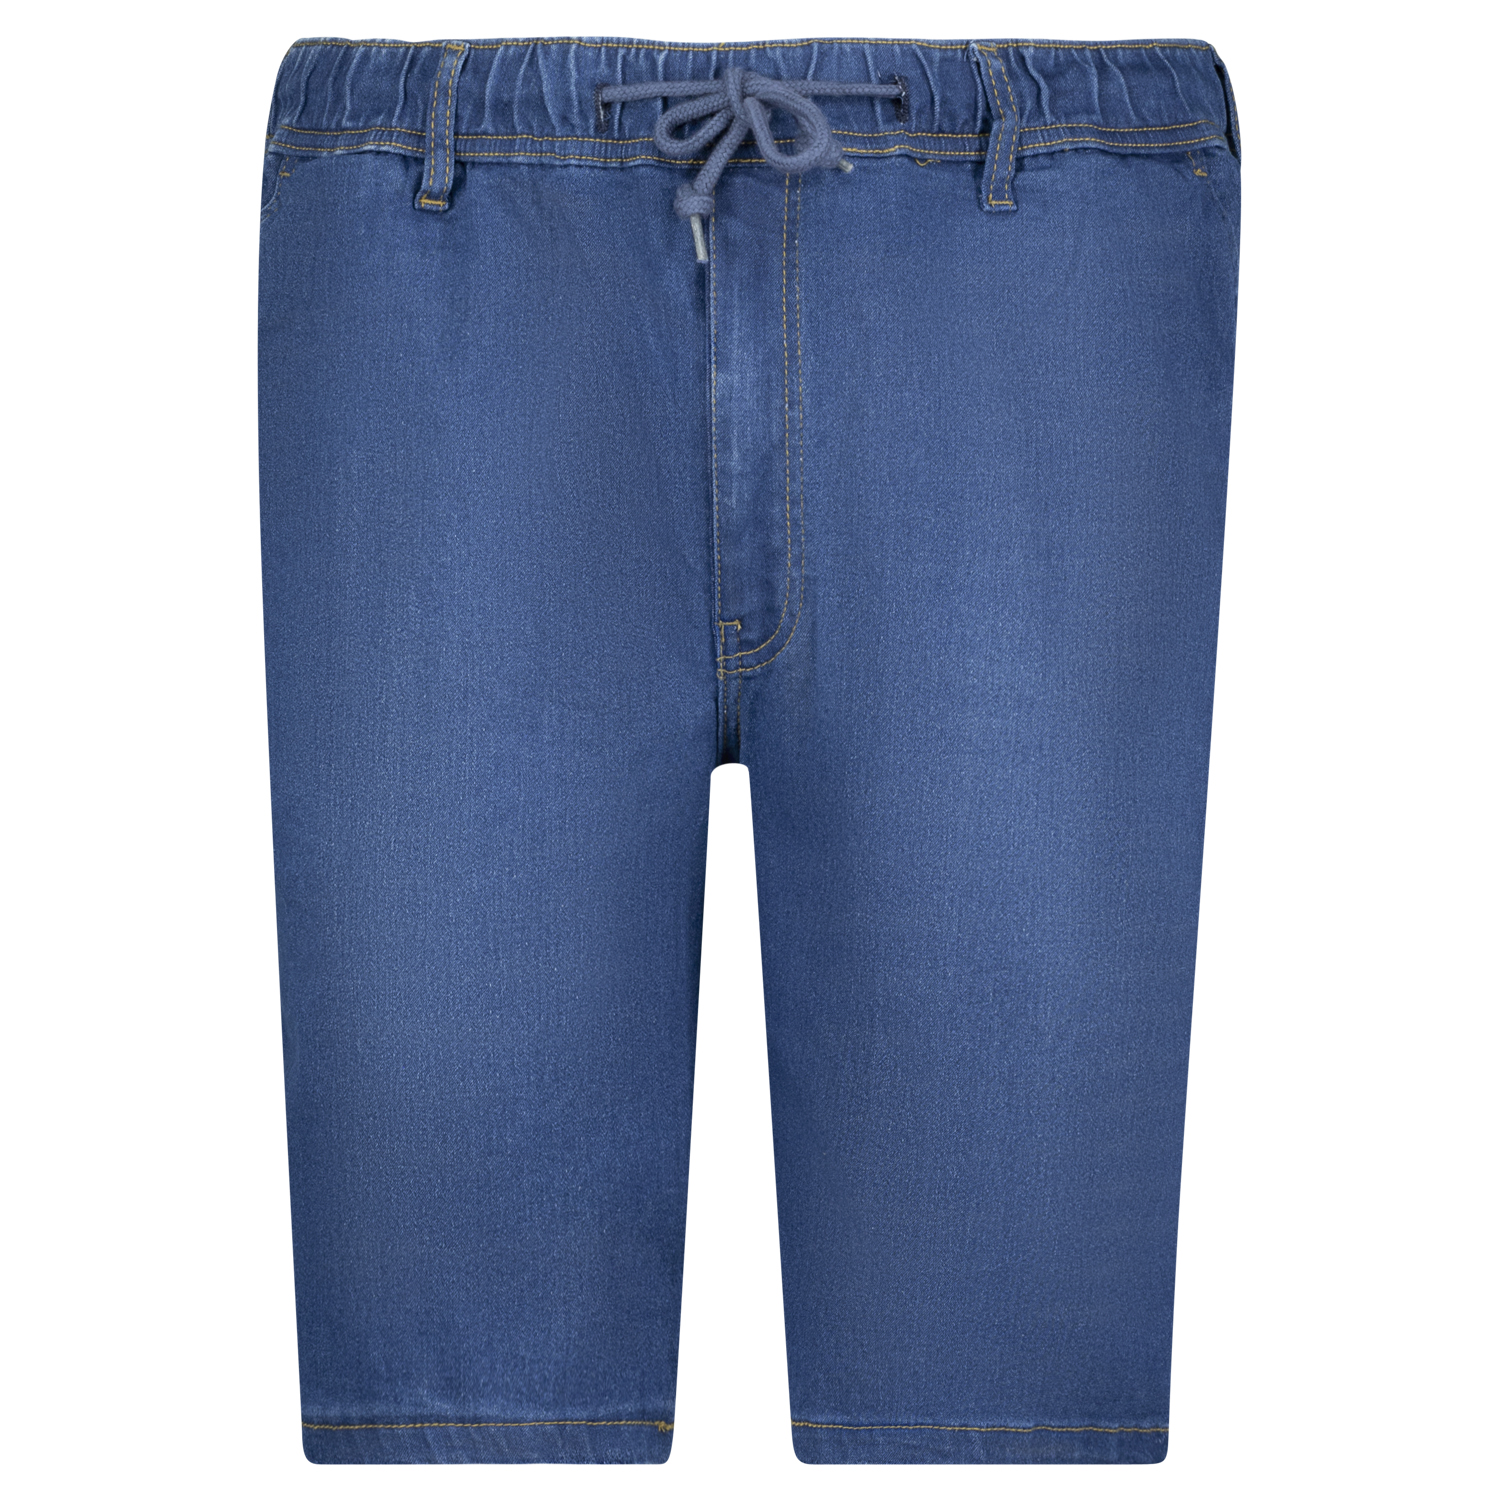 Jeans sweatpants short in medium blue for men by Adamo series "Kansas" in oversizes up to 12XL